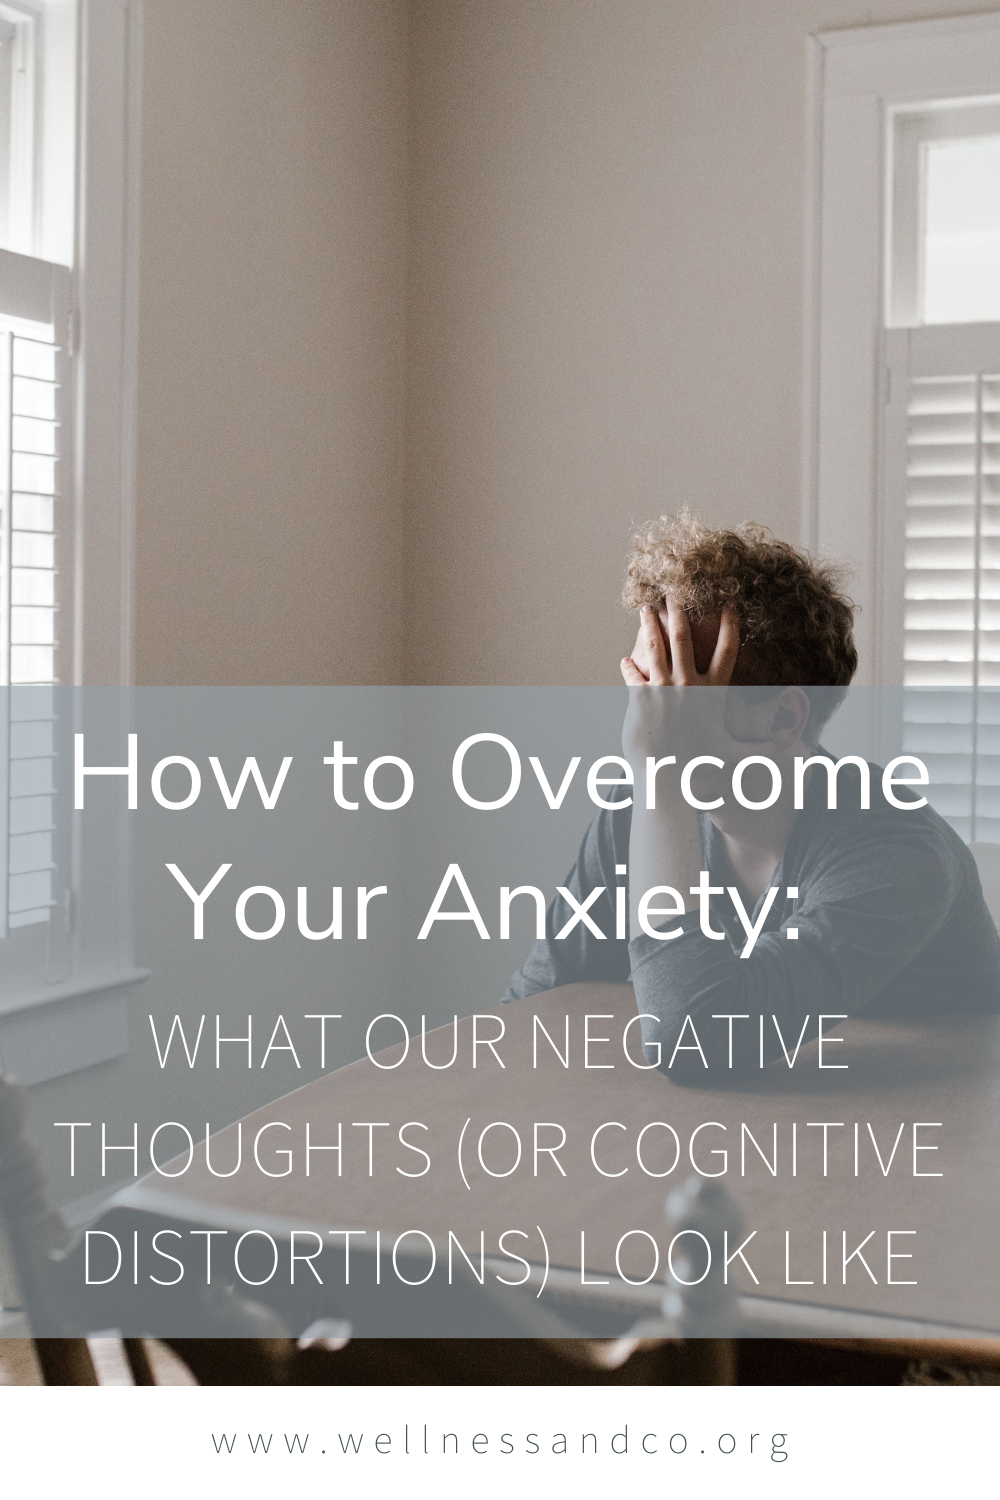 How to overcome from negative thoughts